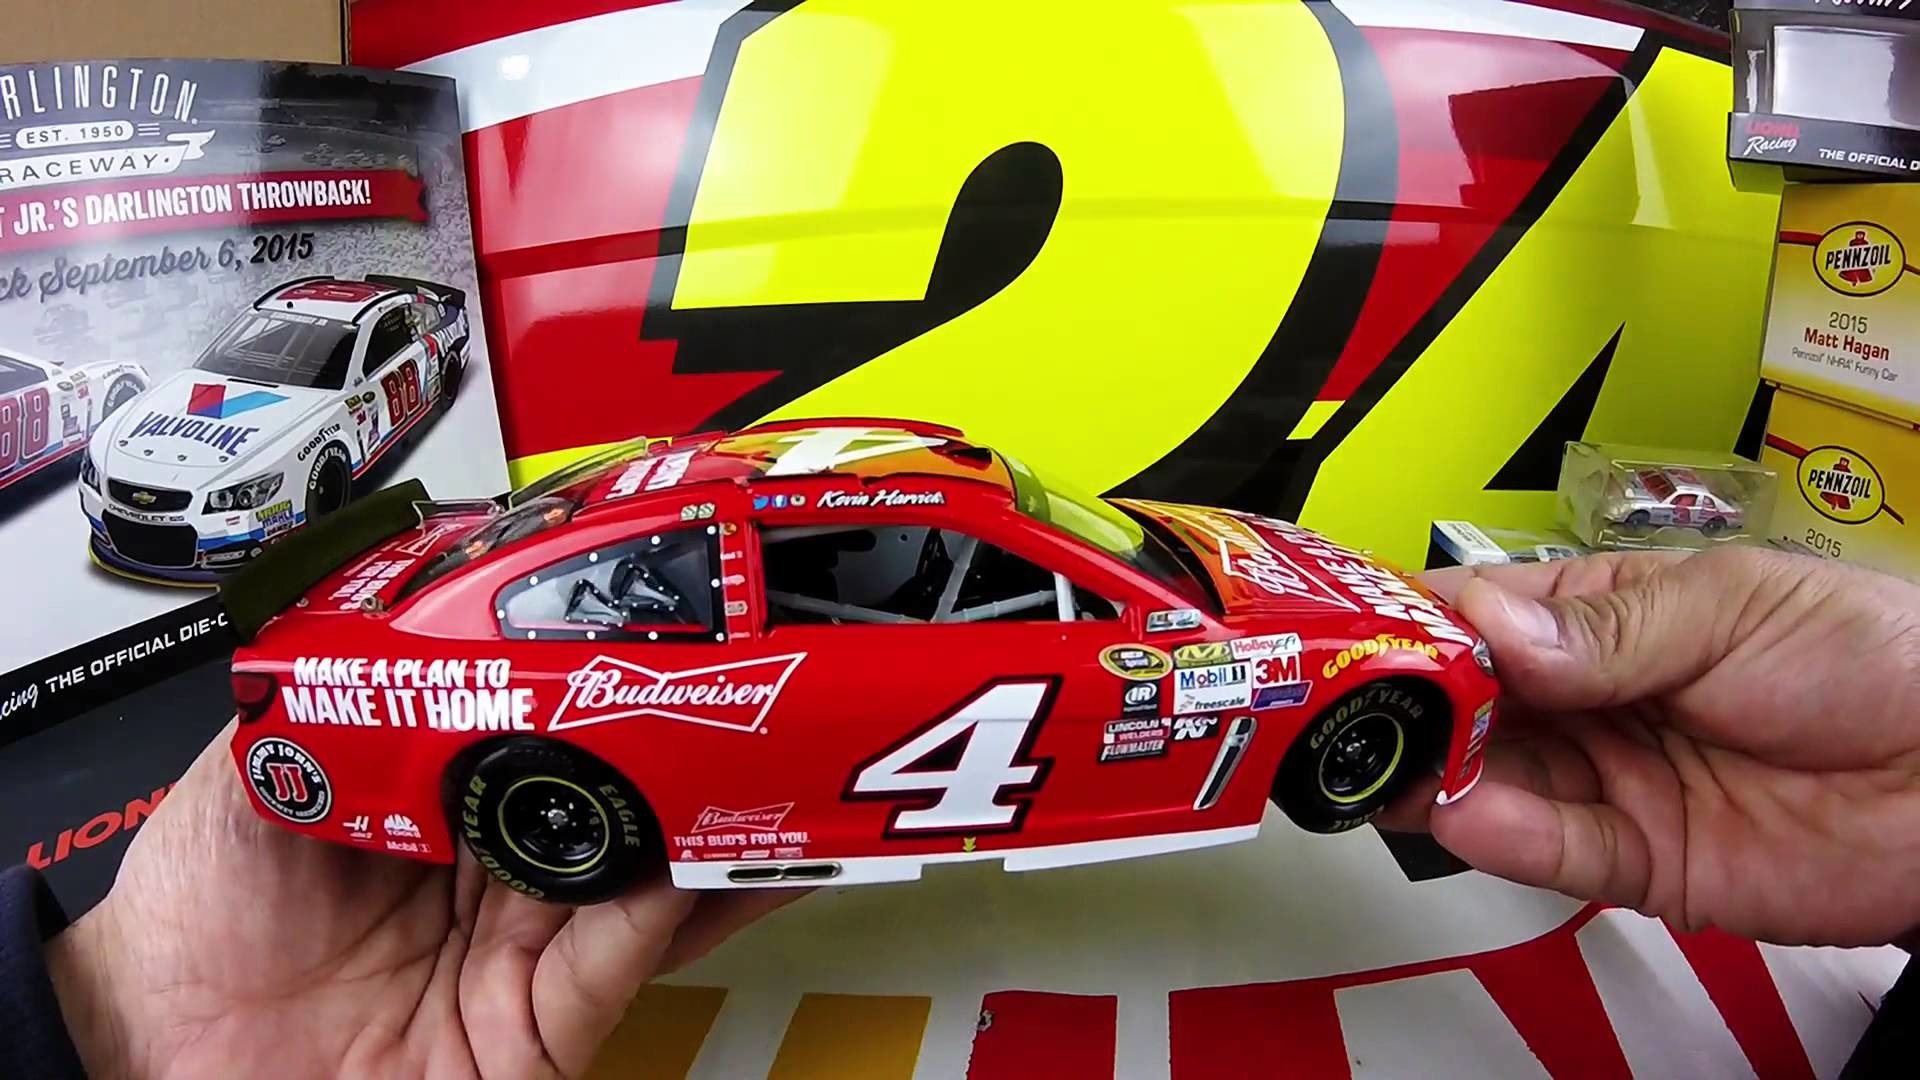 1920x1080 Unbxoing the 2015 Kevin Harvick #4 Make a Plan 1/24 NASCAR Diecast - YouTube